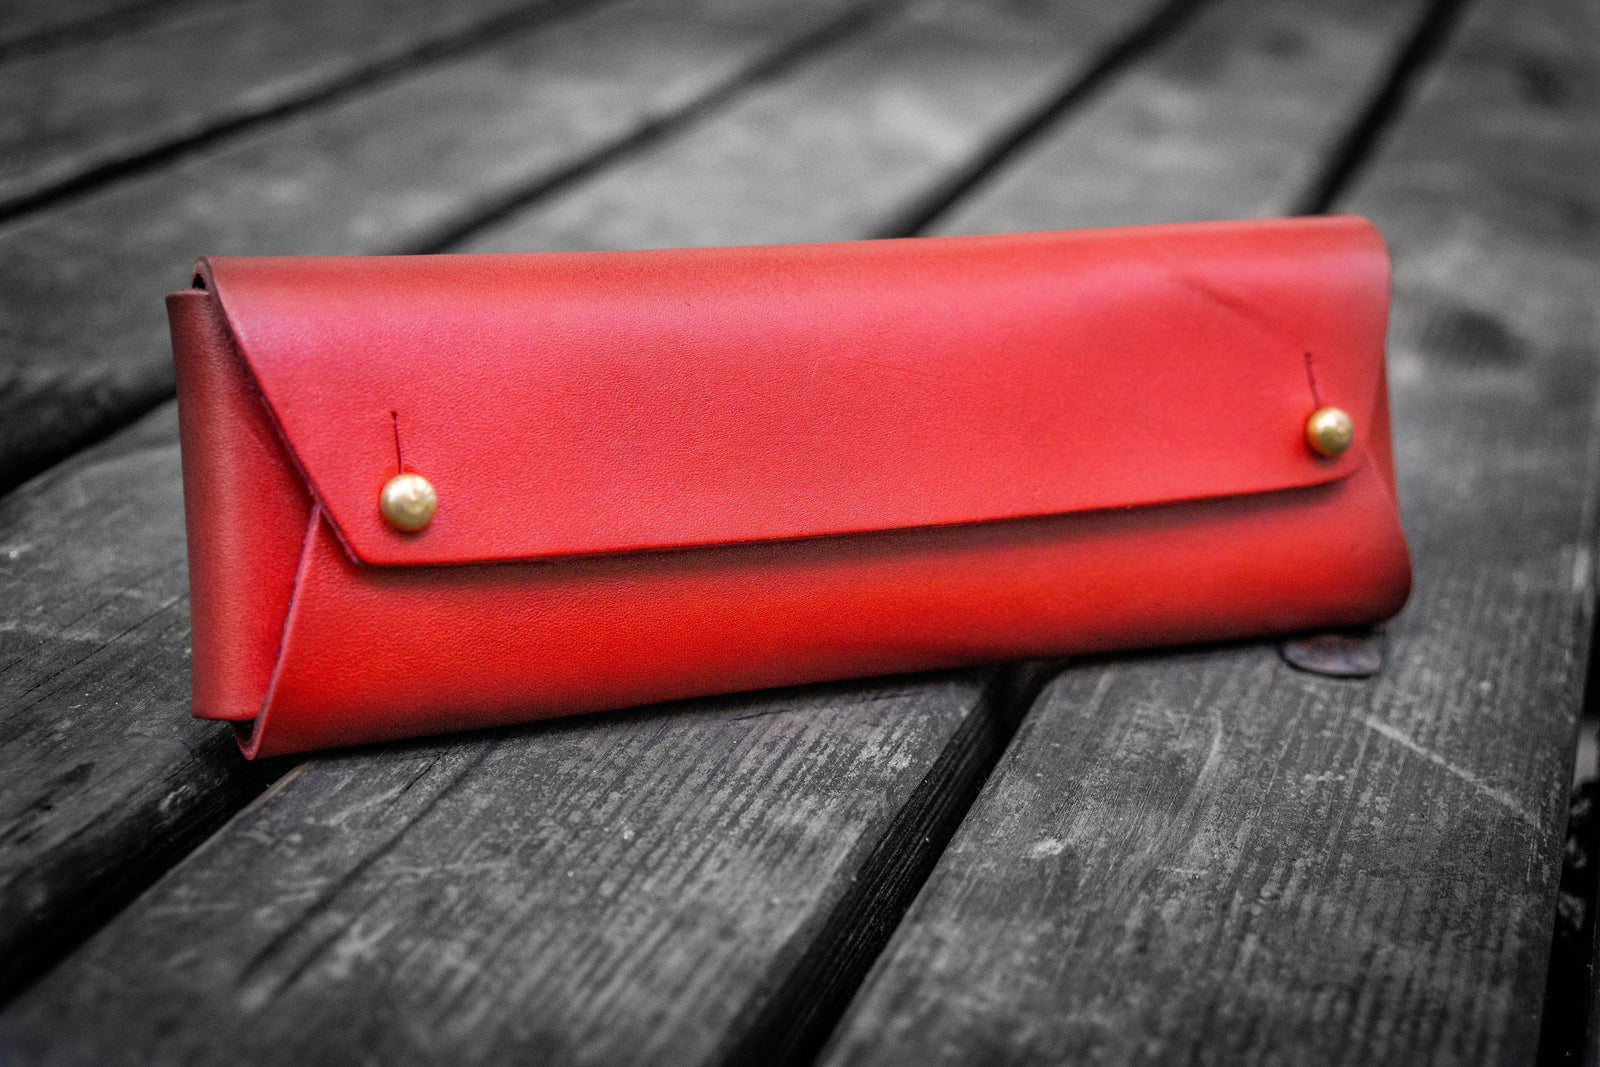 Wholesale Stylish Black And Red PU Leather Thin Pencil Case With